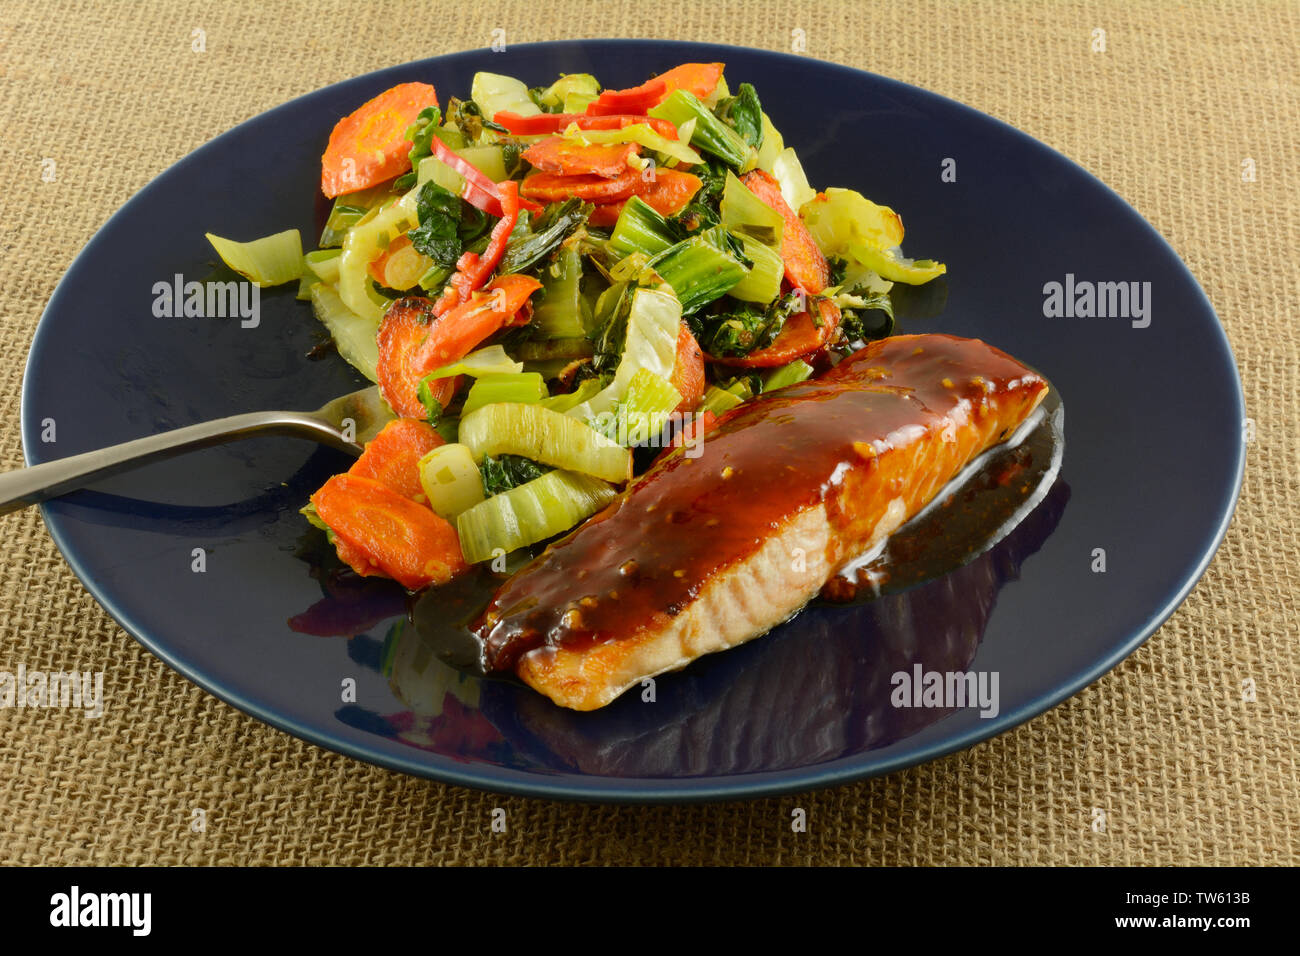 Baked salmon fish fillet with teriyaki sauce and vegetables on blue plate with fork Stock Photo